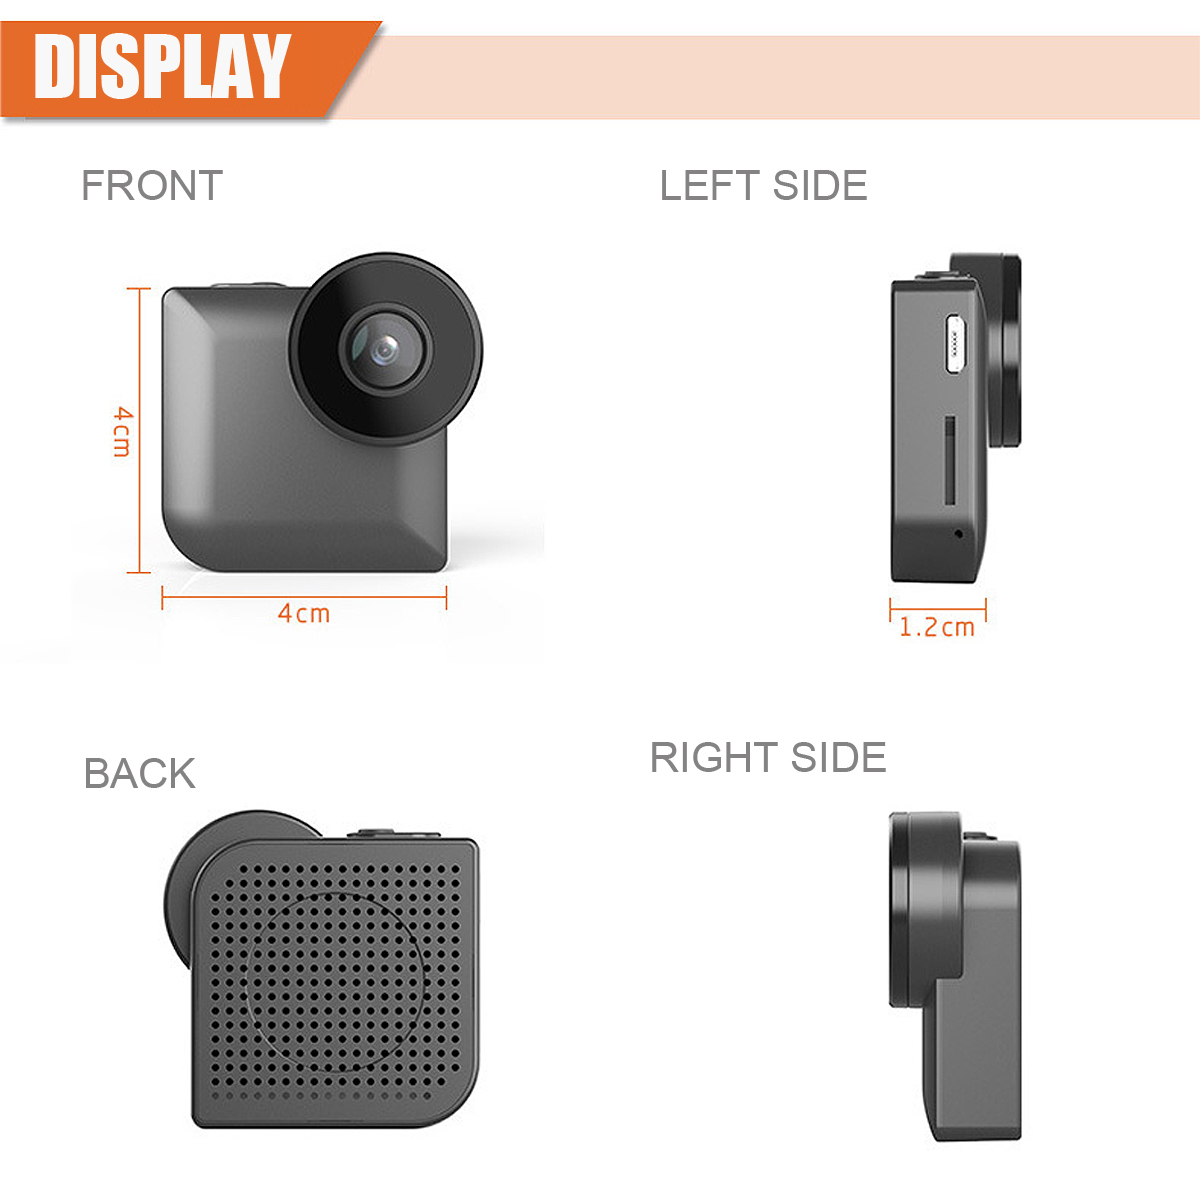 WiFi 140° Wide-angle 720P Camera Motion Detection Remote Intelligent Infrared IP Wireless HD Camera 75